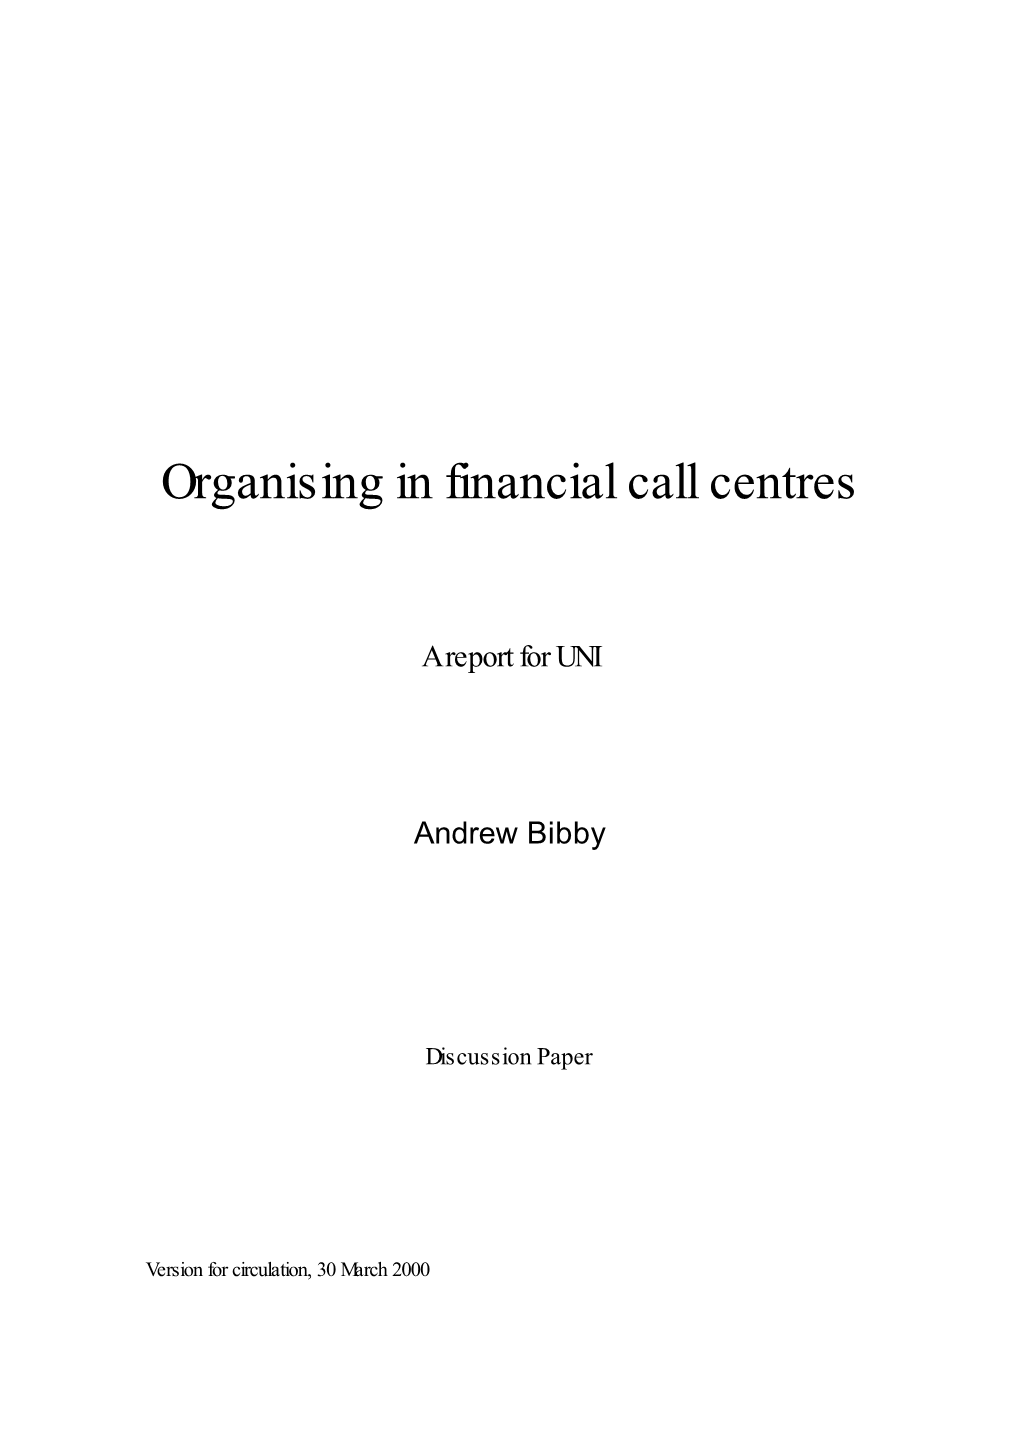 Organising in Financial Call Centres